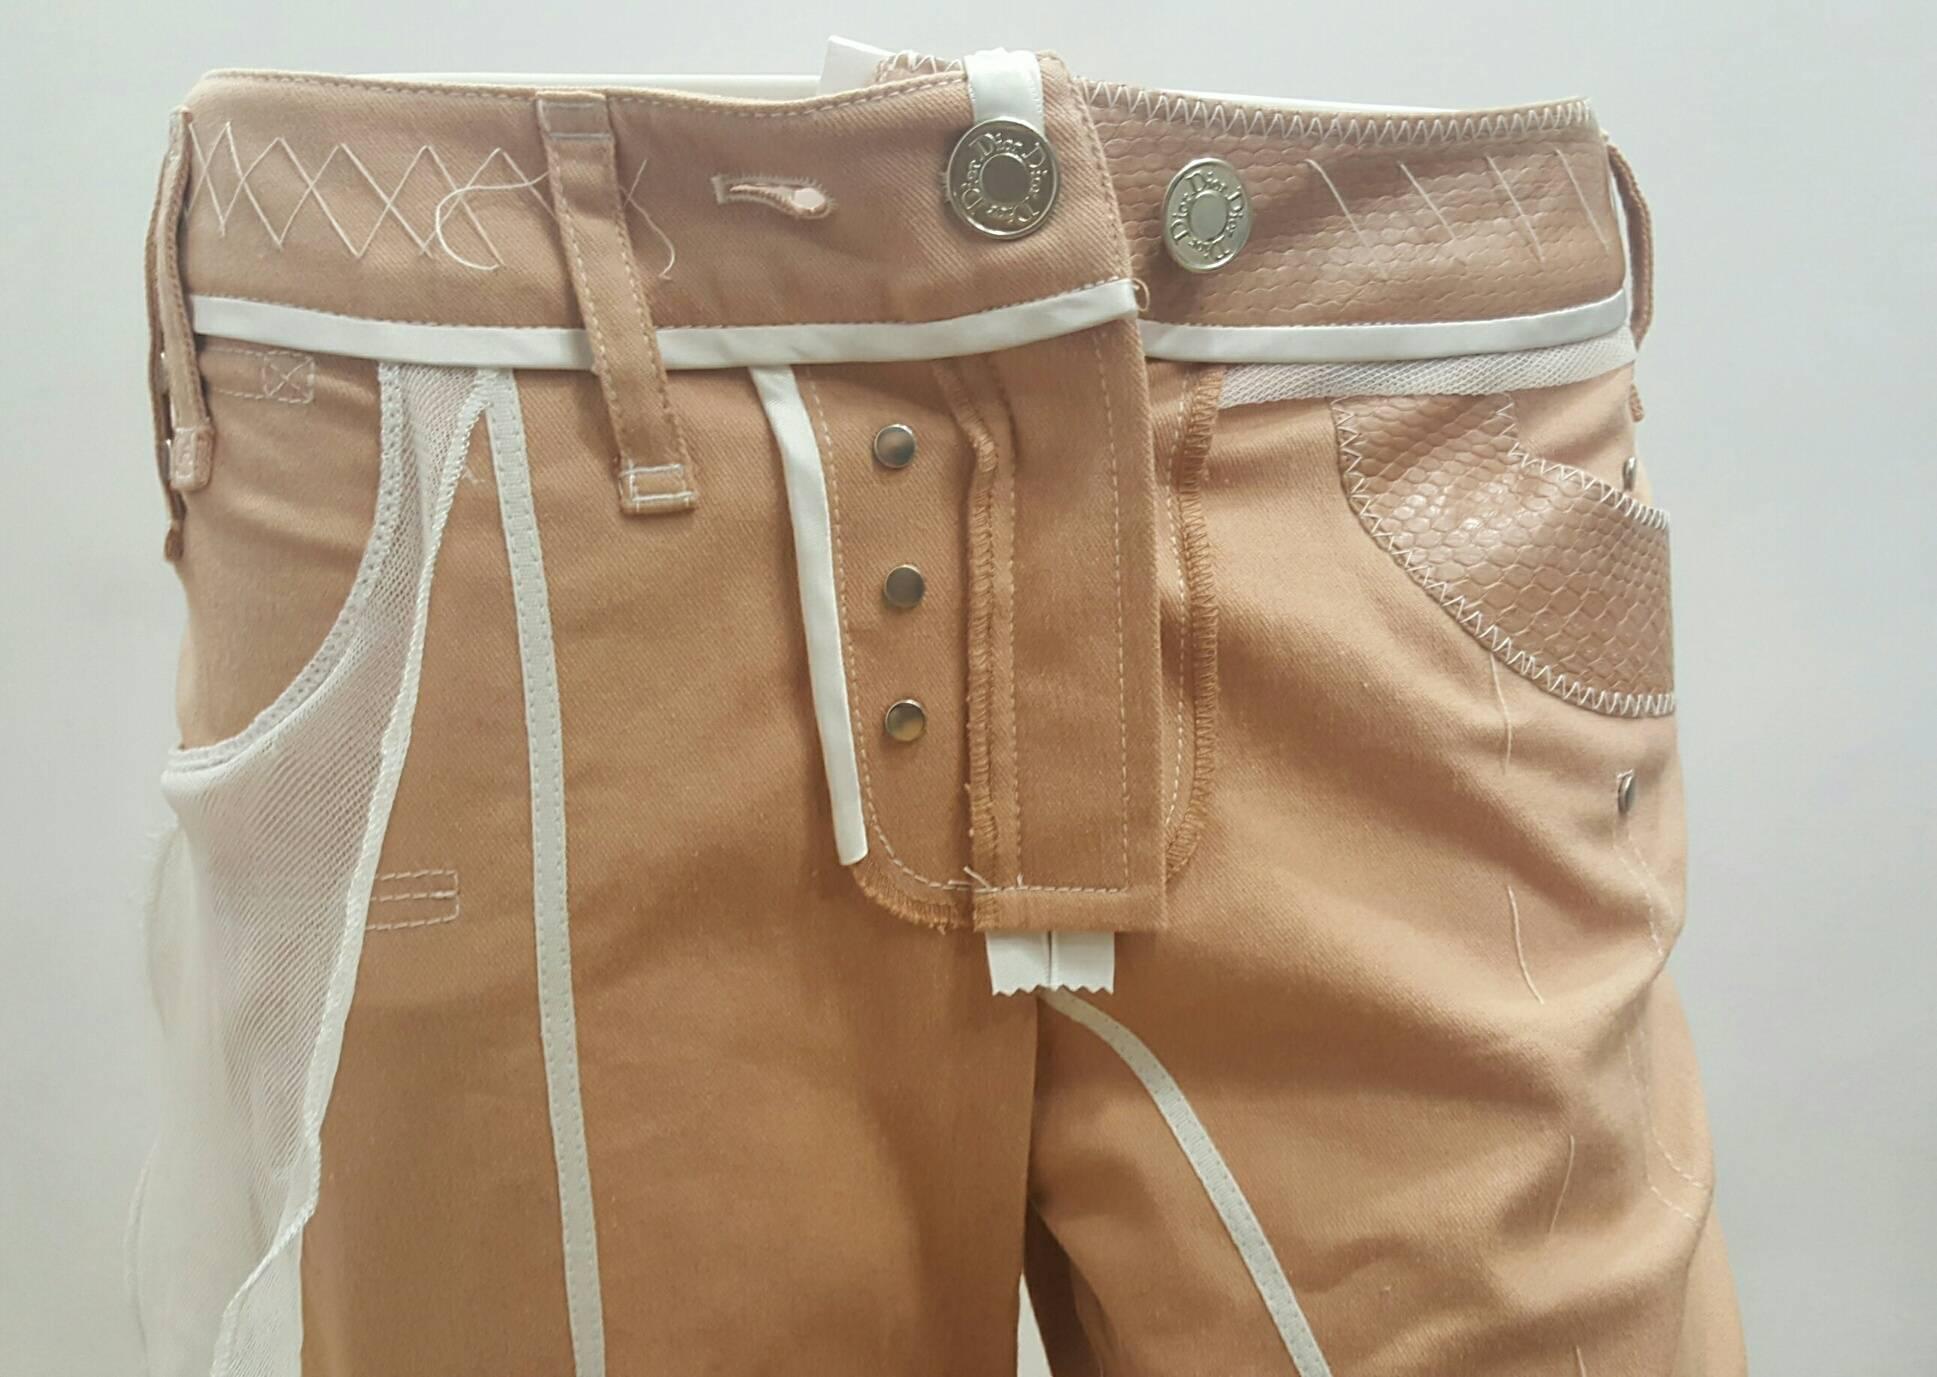 2006 Christian Dior nude tailored pants by John Galliano
Model inspired by 1947
Totally made in Portugal
French Size 38 
Italian size range 42
Composition: 98% cotton 2% Lycra
Price of retail: 910,00€
Other textile: 100% polyamid - 100%